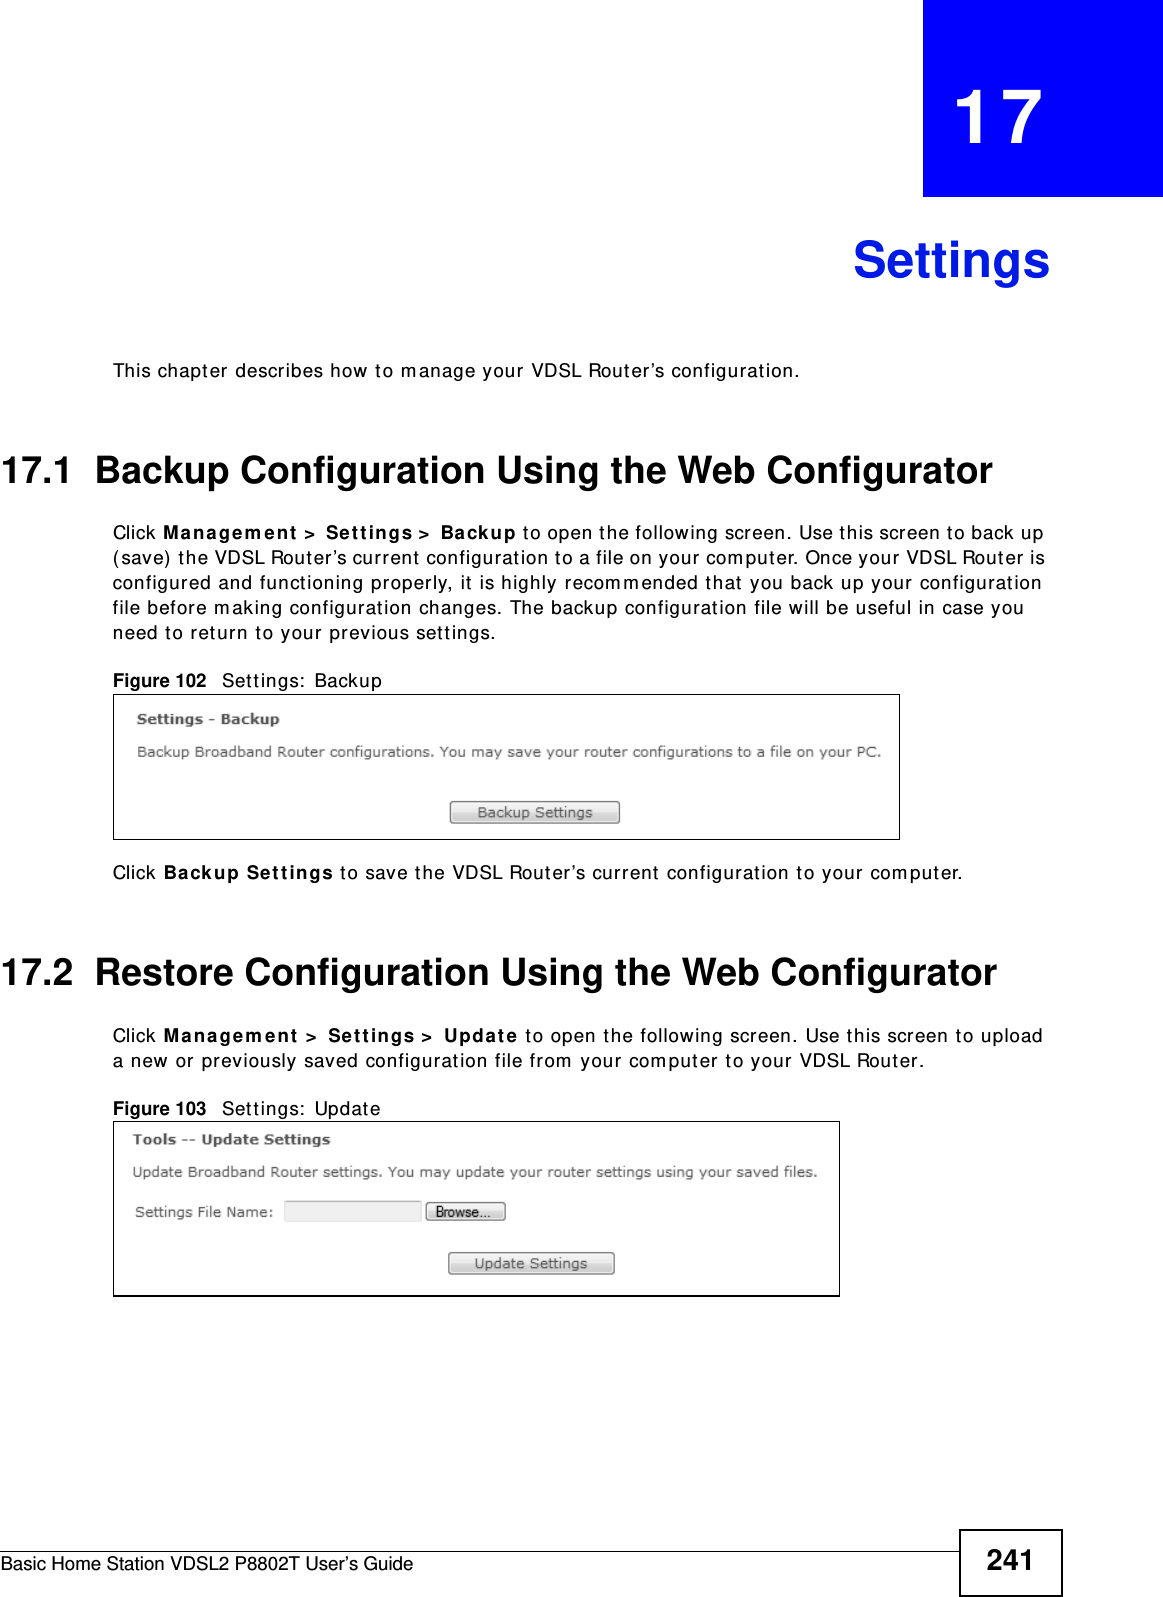 Basic Home Station VDSL2 P8802T User’s Guide 241CHAPTER   17SettingsThis chapt er describes how  to m anage your  VDSL Router’s configuration.17.1  Backup Configuration Using the Web ConfiguratorClick Man agem ent &gt;  Settings &gt;  Back u p to open the following screen. Use t his screen to back up ( save)  t he VDSL Router’s current  configurat ion to a file on your com put er. Once your VDSL Router is configured and functioning pr operly, it is highly recomm ended that you back up your configuration file before m aking configuration changes. The backup configurat ion file will be useful in case you need to return to your previous sett ings. Figure 102   Sett ings:  BackupClick Back up Se t t ings to save t he VDSL Rout er’s current  configuration t o your com puter.17.2  Restore Configuration Using the Web ConfiguratorClick Managem e nt  &gt;  Se t t ings &gt;  Upda t e  to open t he following screen. Use t his screen t o upload a new or previously saved configuration file from  your computer to your VDSL Router. Figure 103   Sett ings:  Updat e